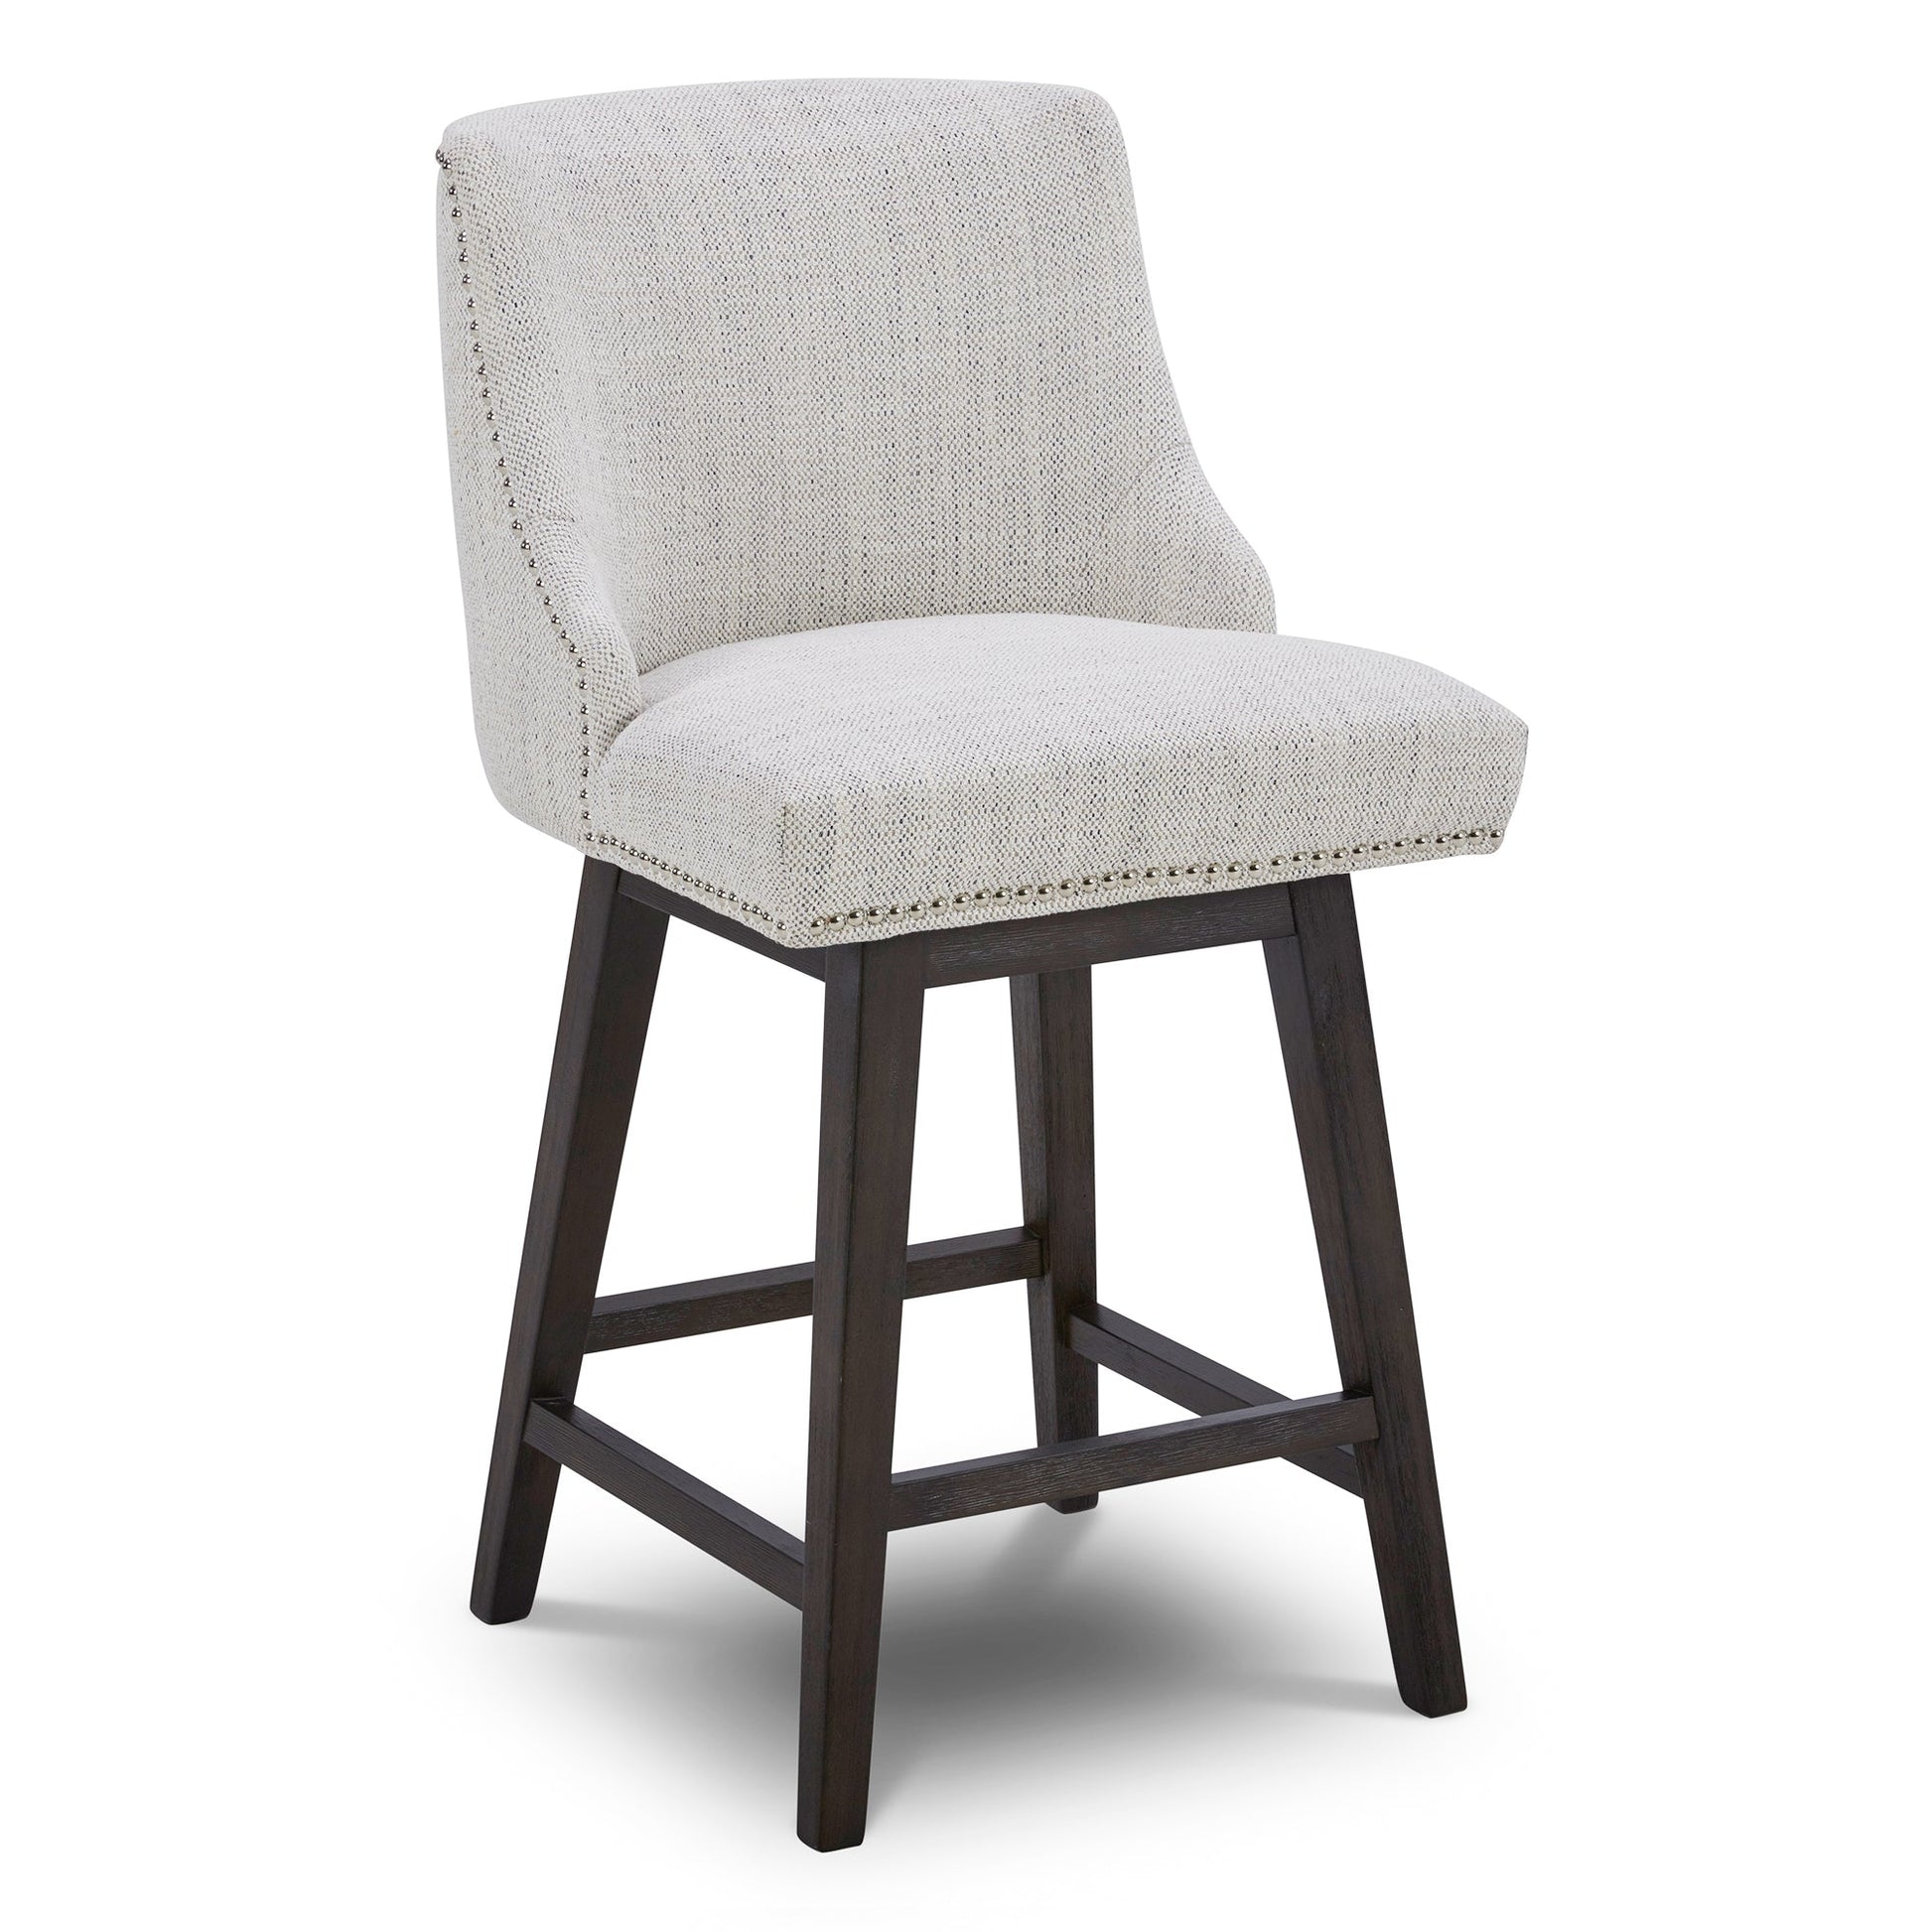 CHITA LIVING-Asher Swivel Counter Stool with Nailhead Trim-Counter Stools-Fabric-Ivory-